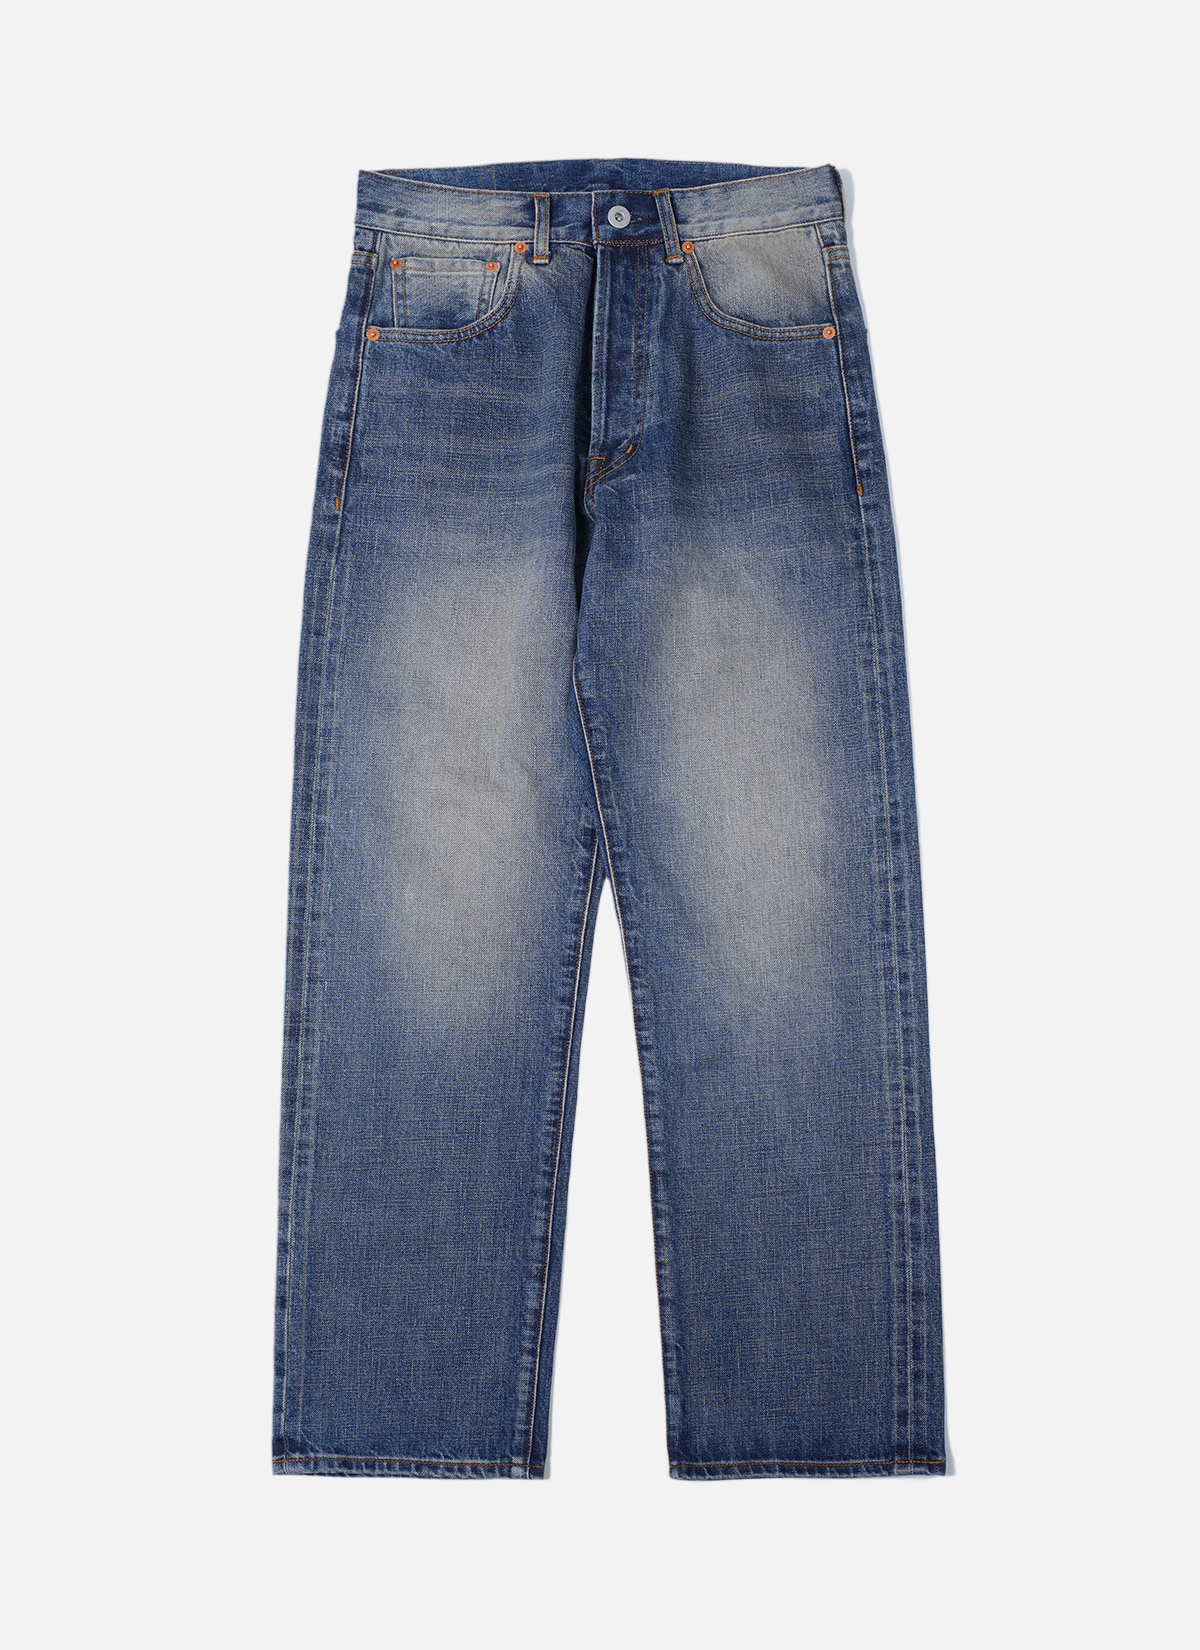 Woody Pants Dirty Wash ( Japanese Selvedge Denim Fabric by COLLECT CO. LTD )